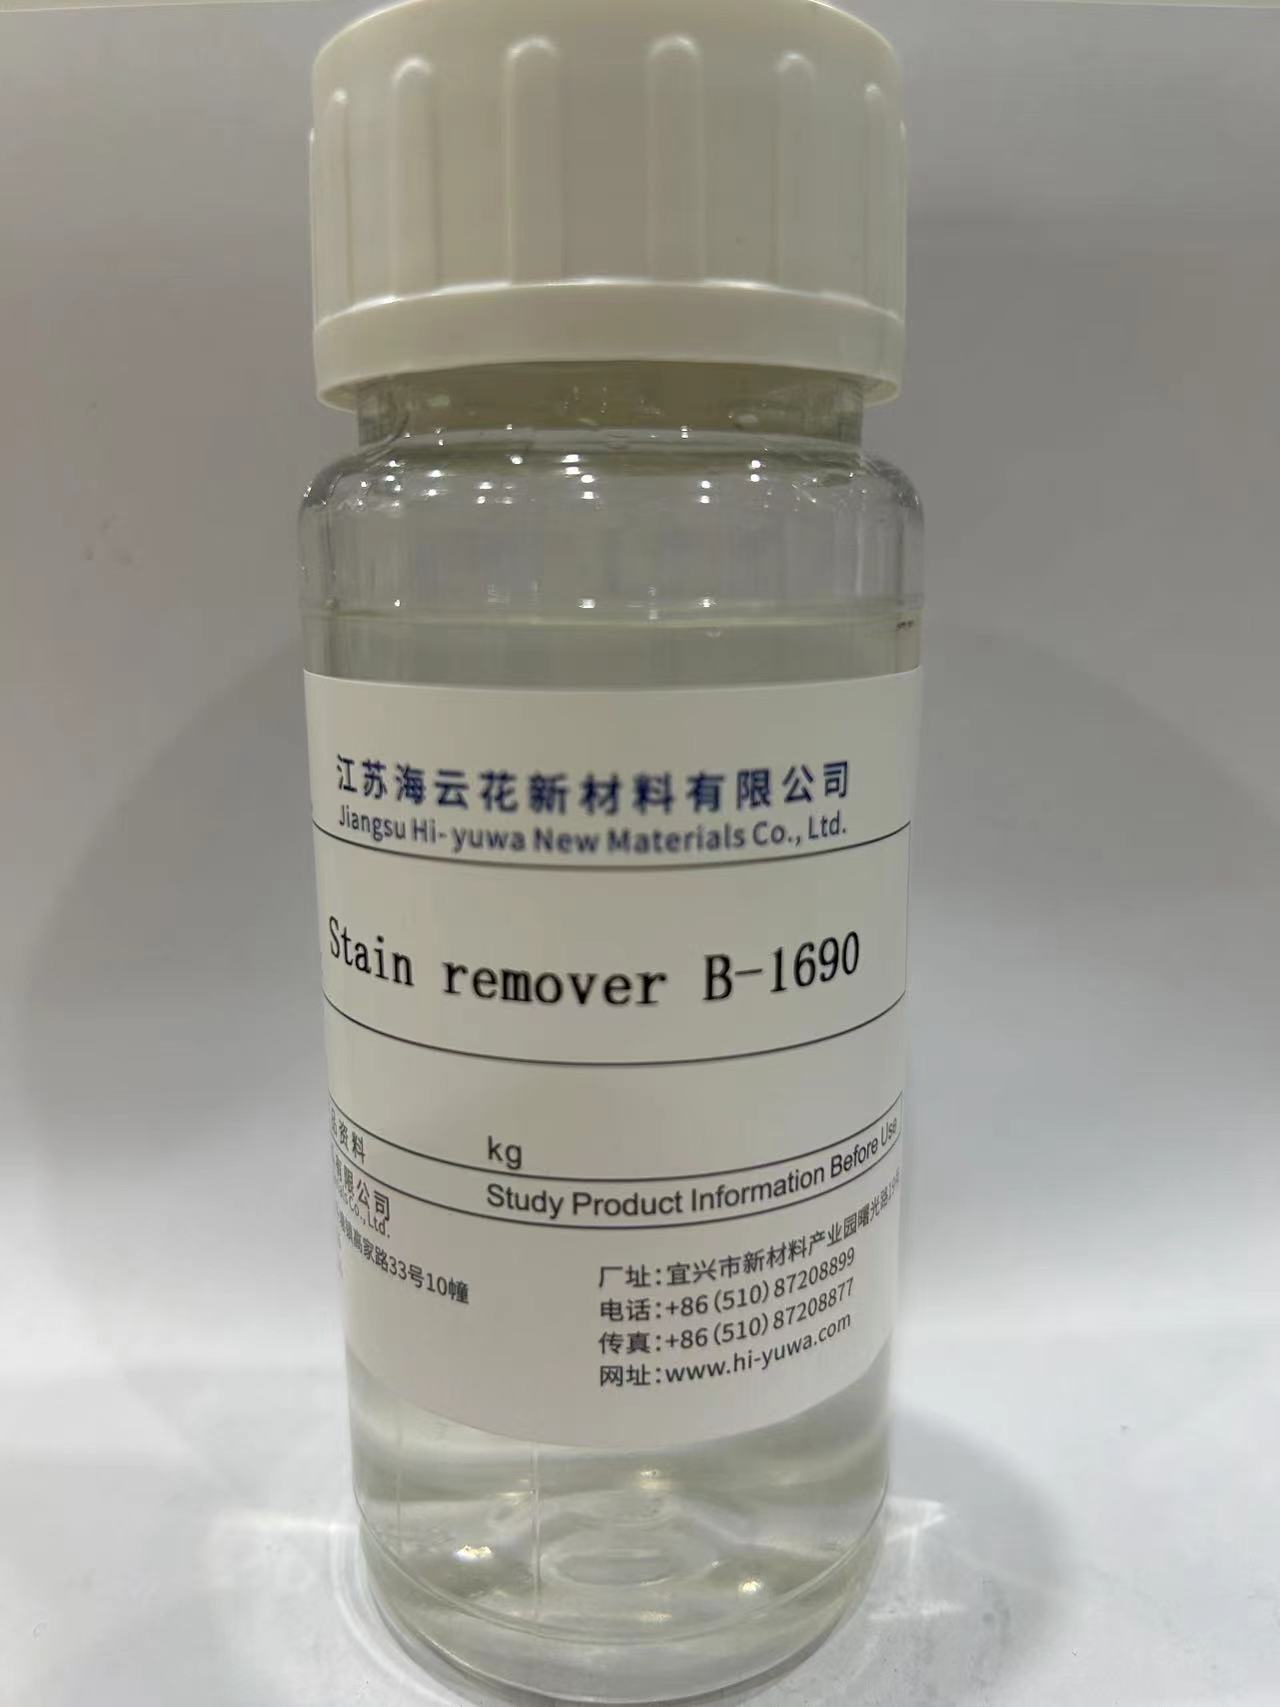 Stain remover 1690